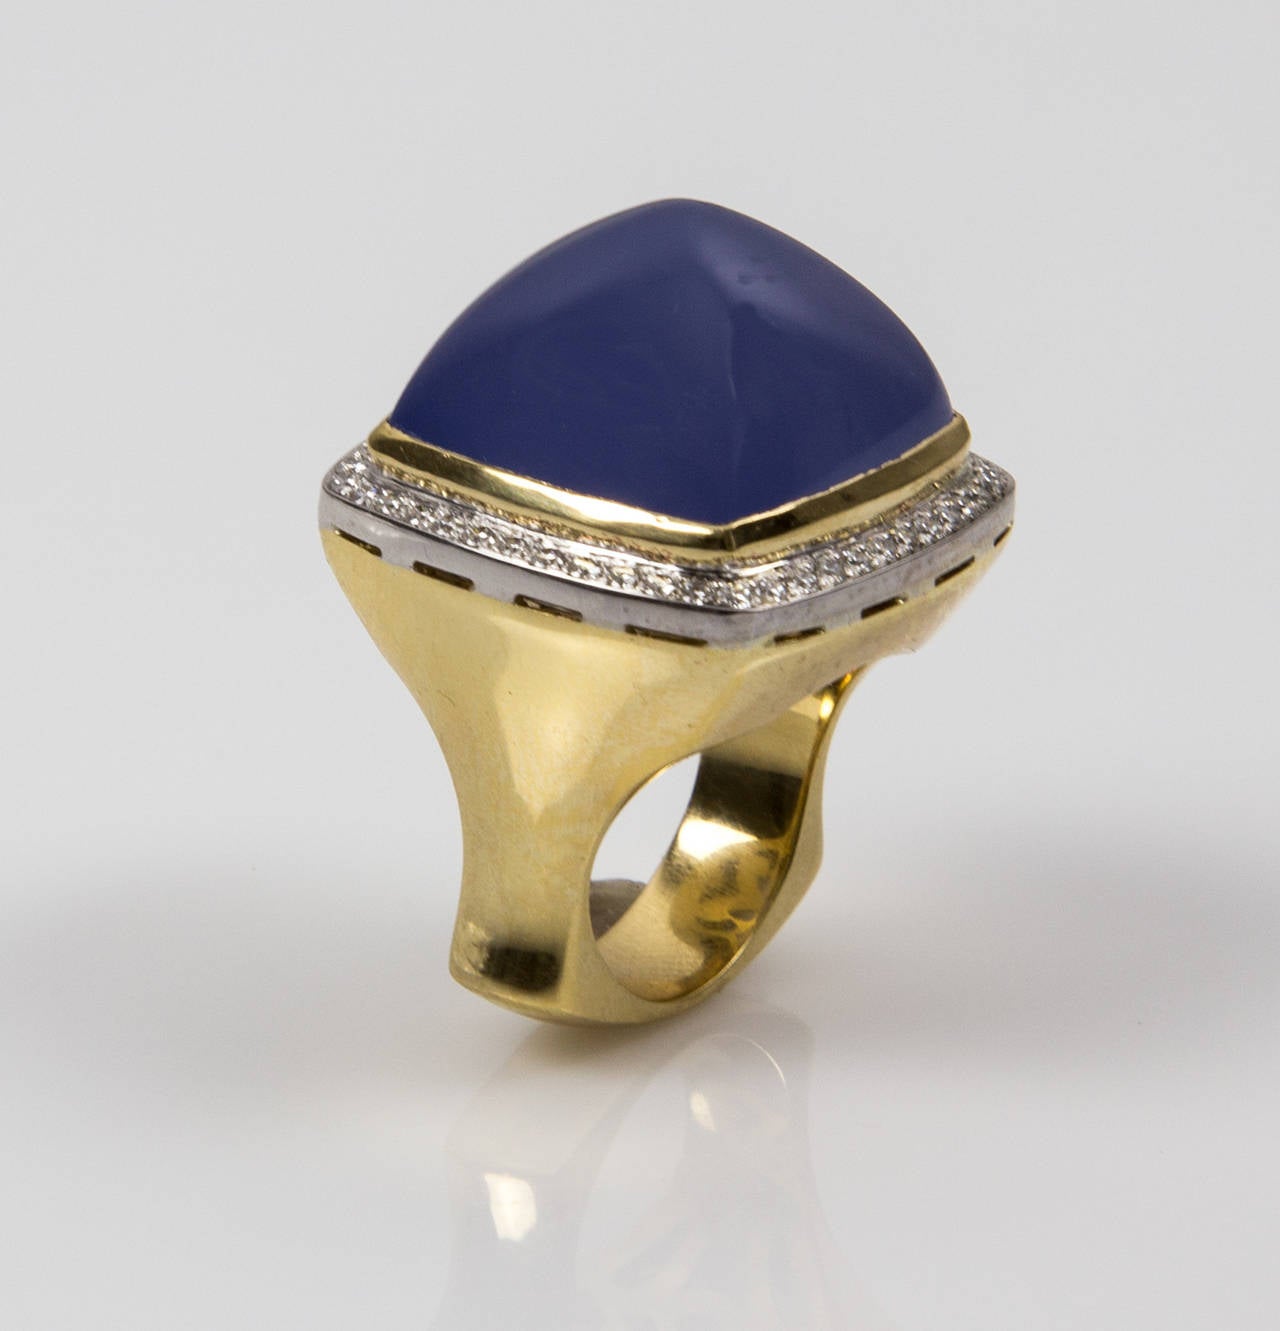 Magnificent Classic Dress Ring, centering a large 39.02 carat Sugarloaf cabochon-cut Blue Chalcedony, surrounded by 48 round brilliant-cut diamonds with an approx total weight of 0.48ct; artistically hand crafted in 18k yellow and white gold; Ring